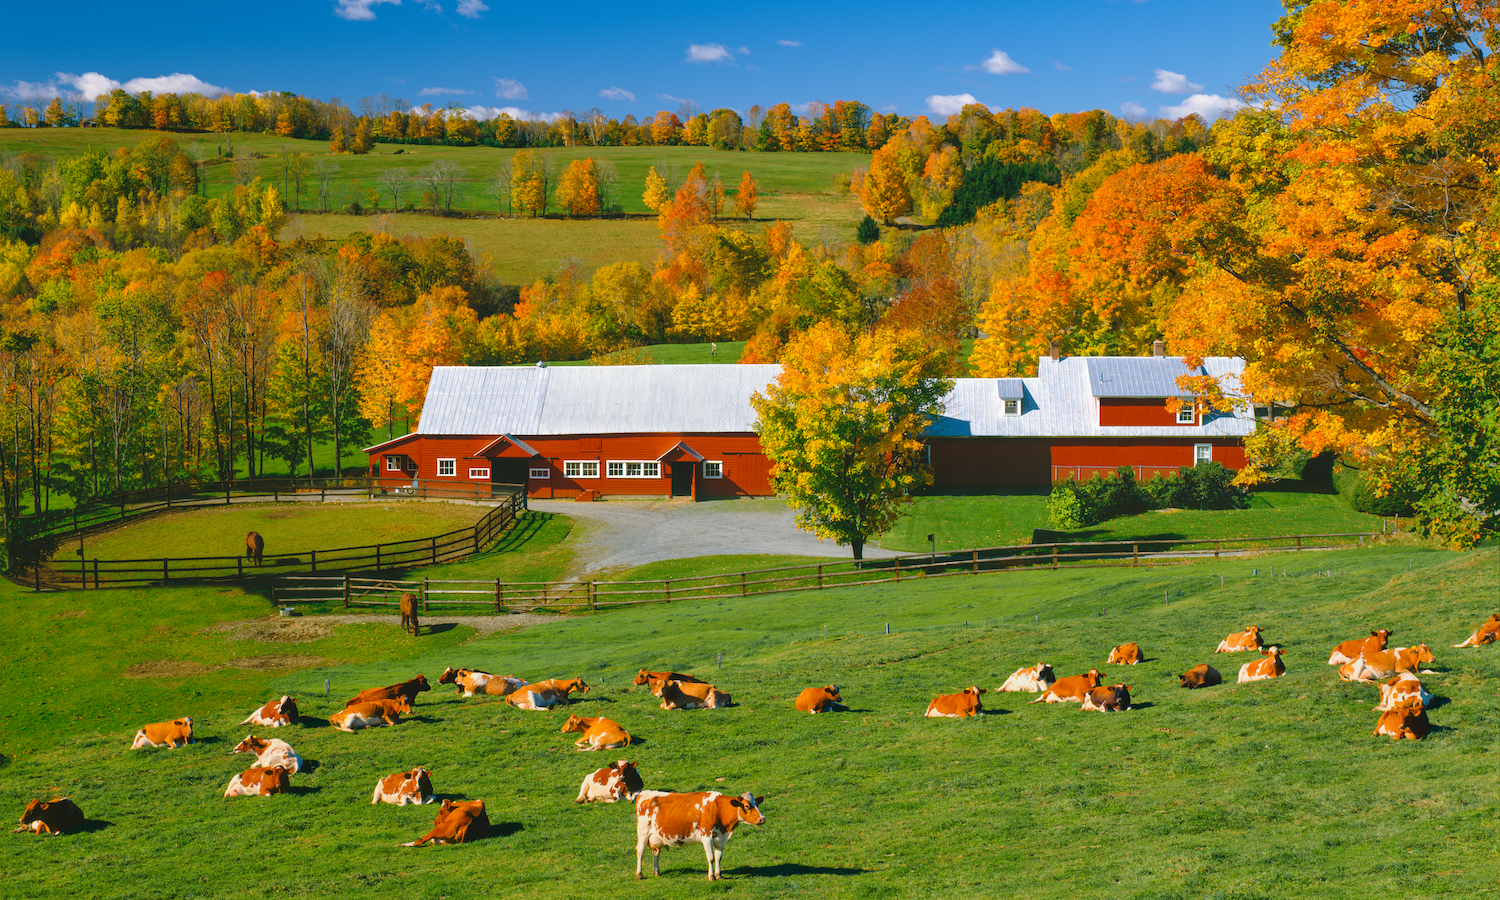 Vermont dairy farm with red barn during autumn